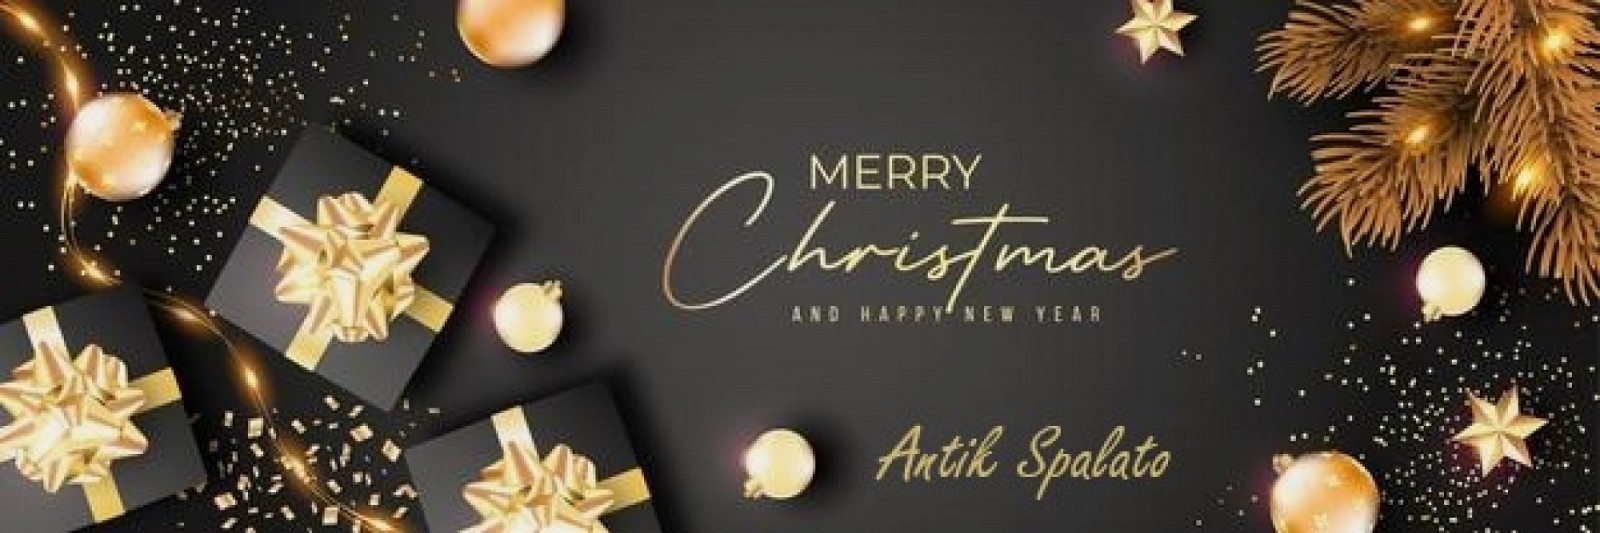 Merry Christmas and Happy New Year | Antik Spalato Shop